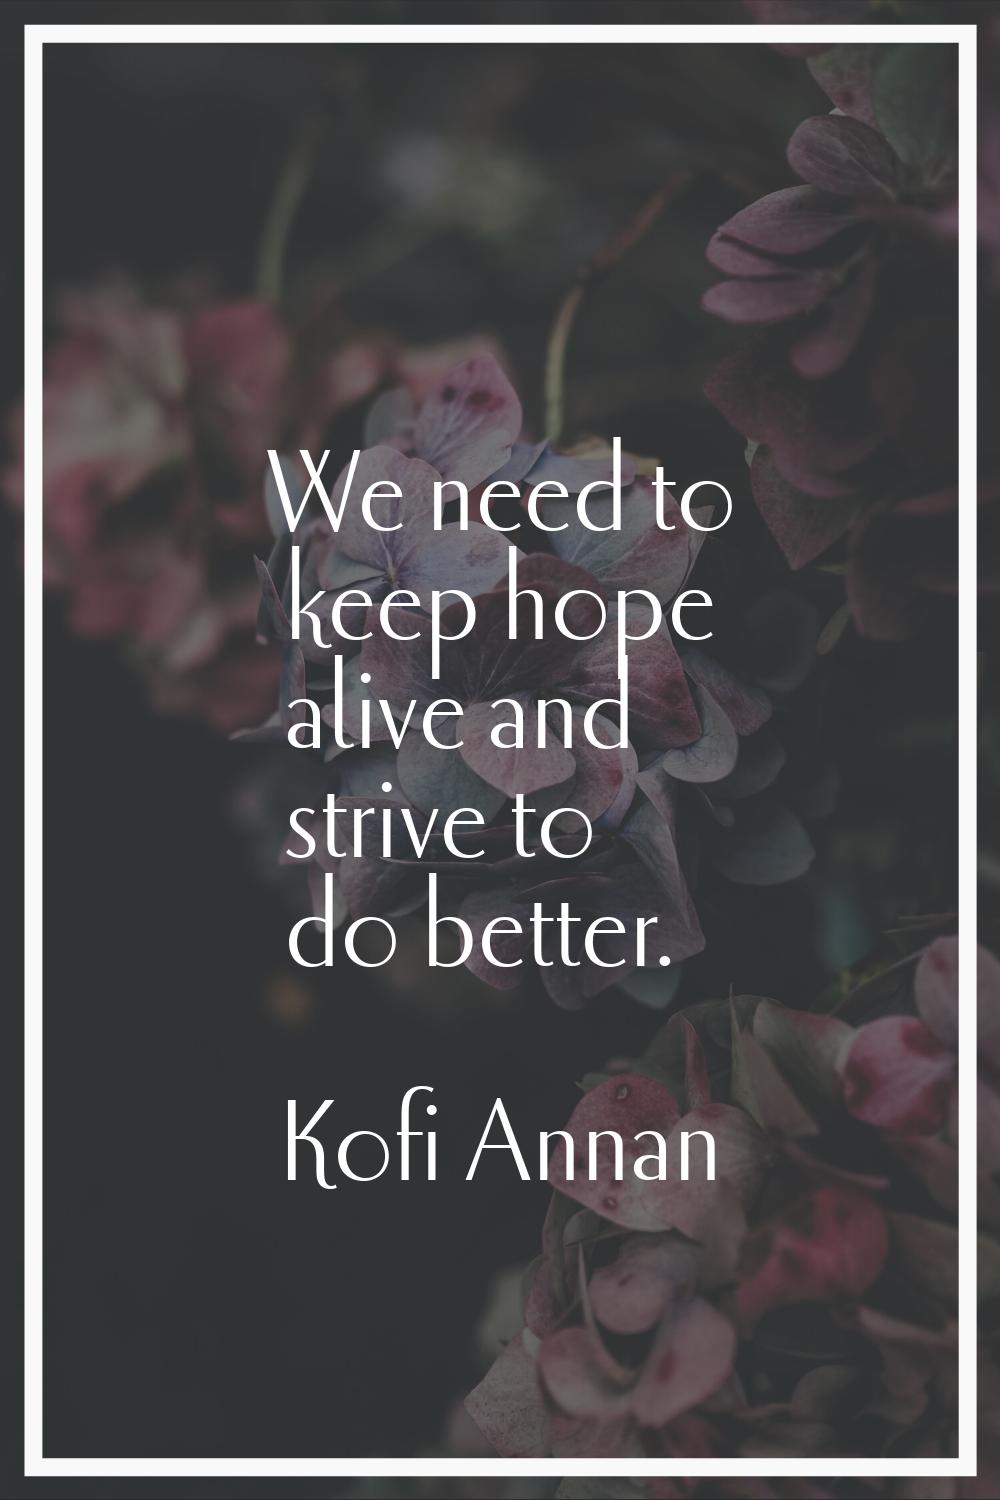 We need to keep hope alive and strive to do better.